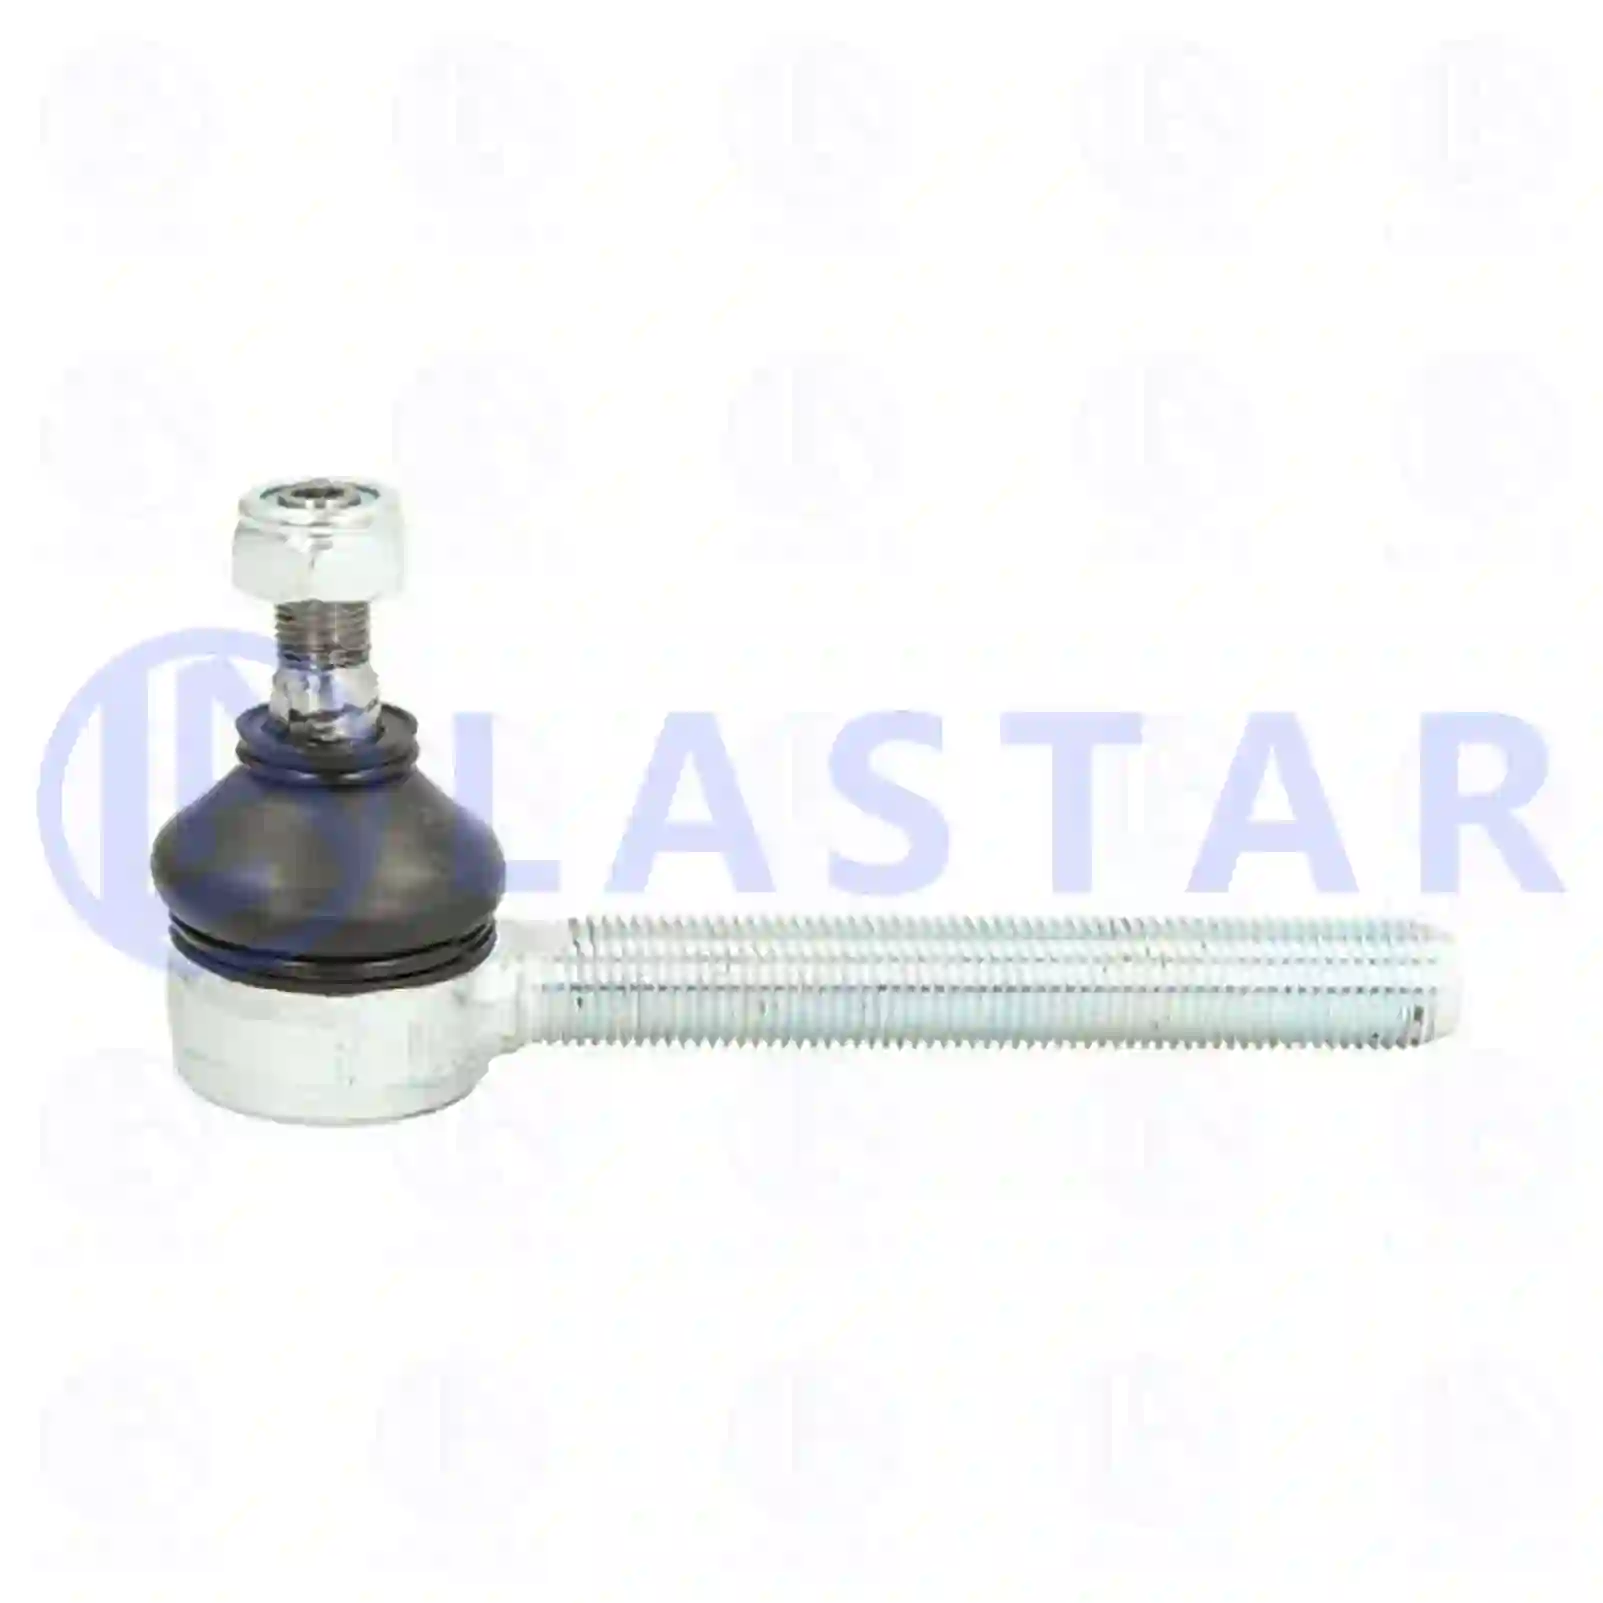 Ball joint, right hand thread, 77733318, 81953016200, 81953016202, 81953016203, 81953016227, 3124625, ZG40142-0008 ||  77733318 Lastar Spare Part | Truck Spare Parts, Auotomotive Spare Parts Ball joint, right hand thread, 77733318, 81953016200, 81953016202, 81953016203, 81953016227, 3124625, ZG40142-0008 ||  77733318 Lastar Spare Part | Truck Spare Parts, Auotomotive Spare Parts